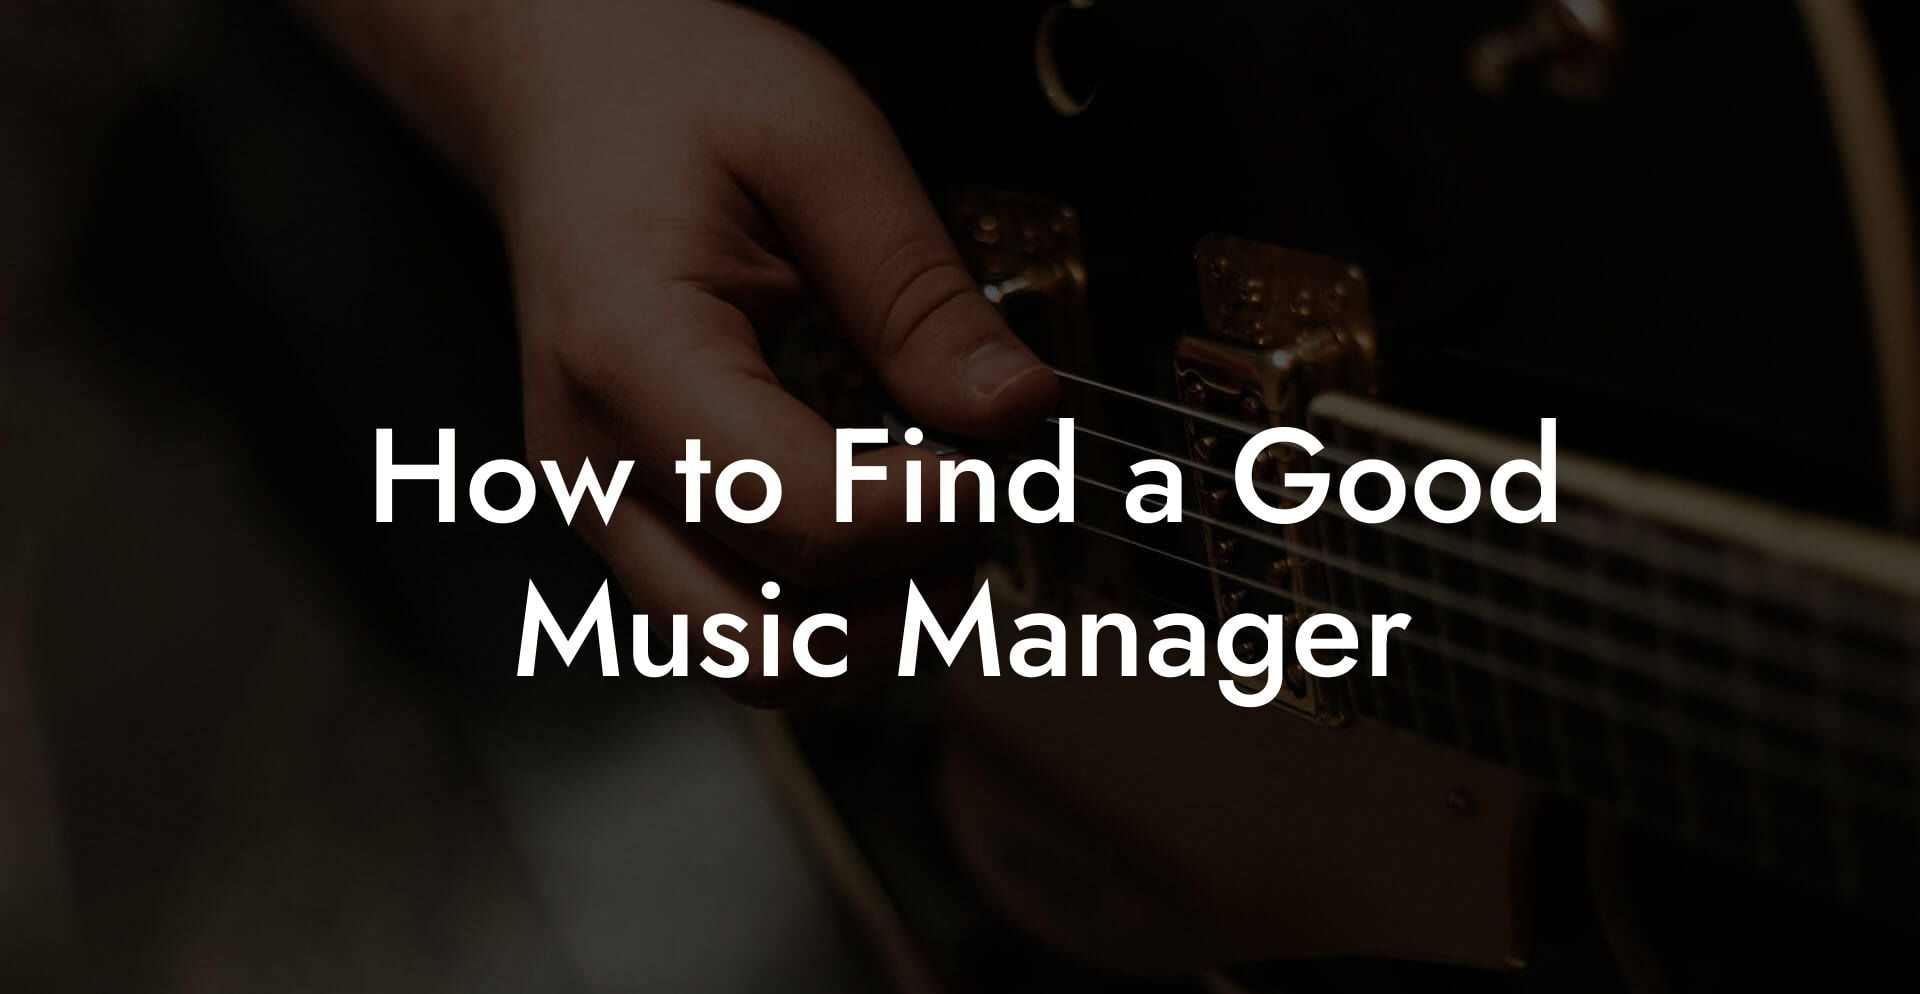 How to Find a Good Music Manager